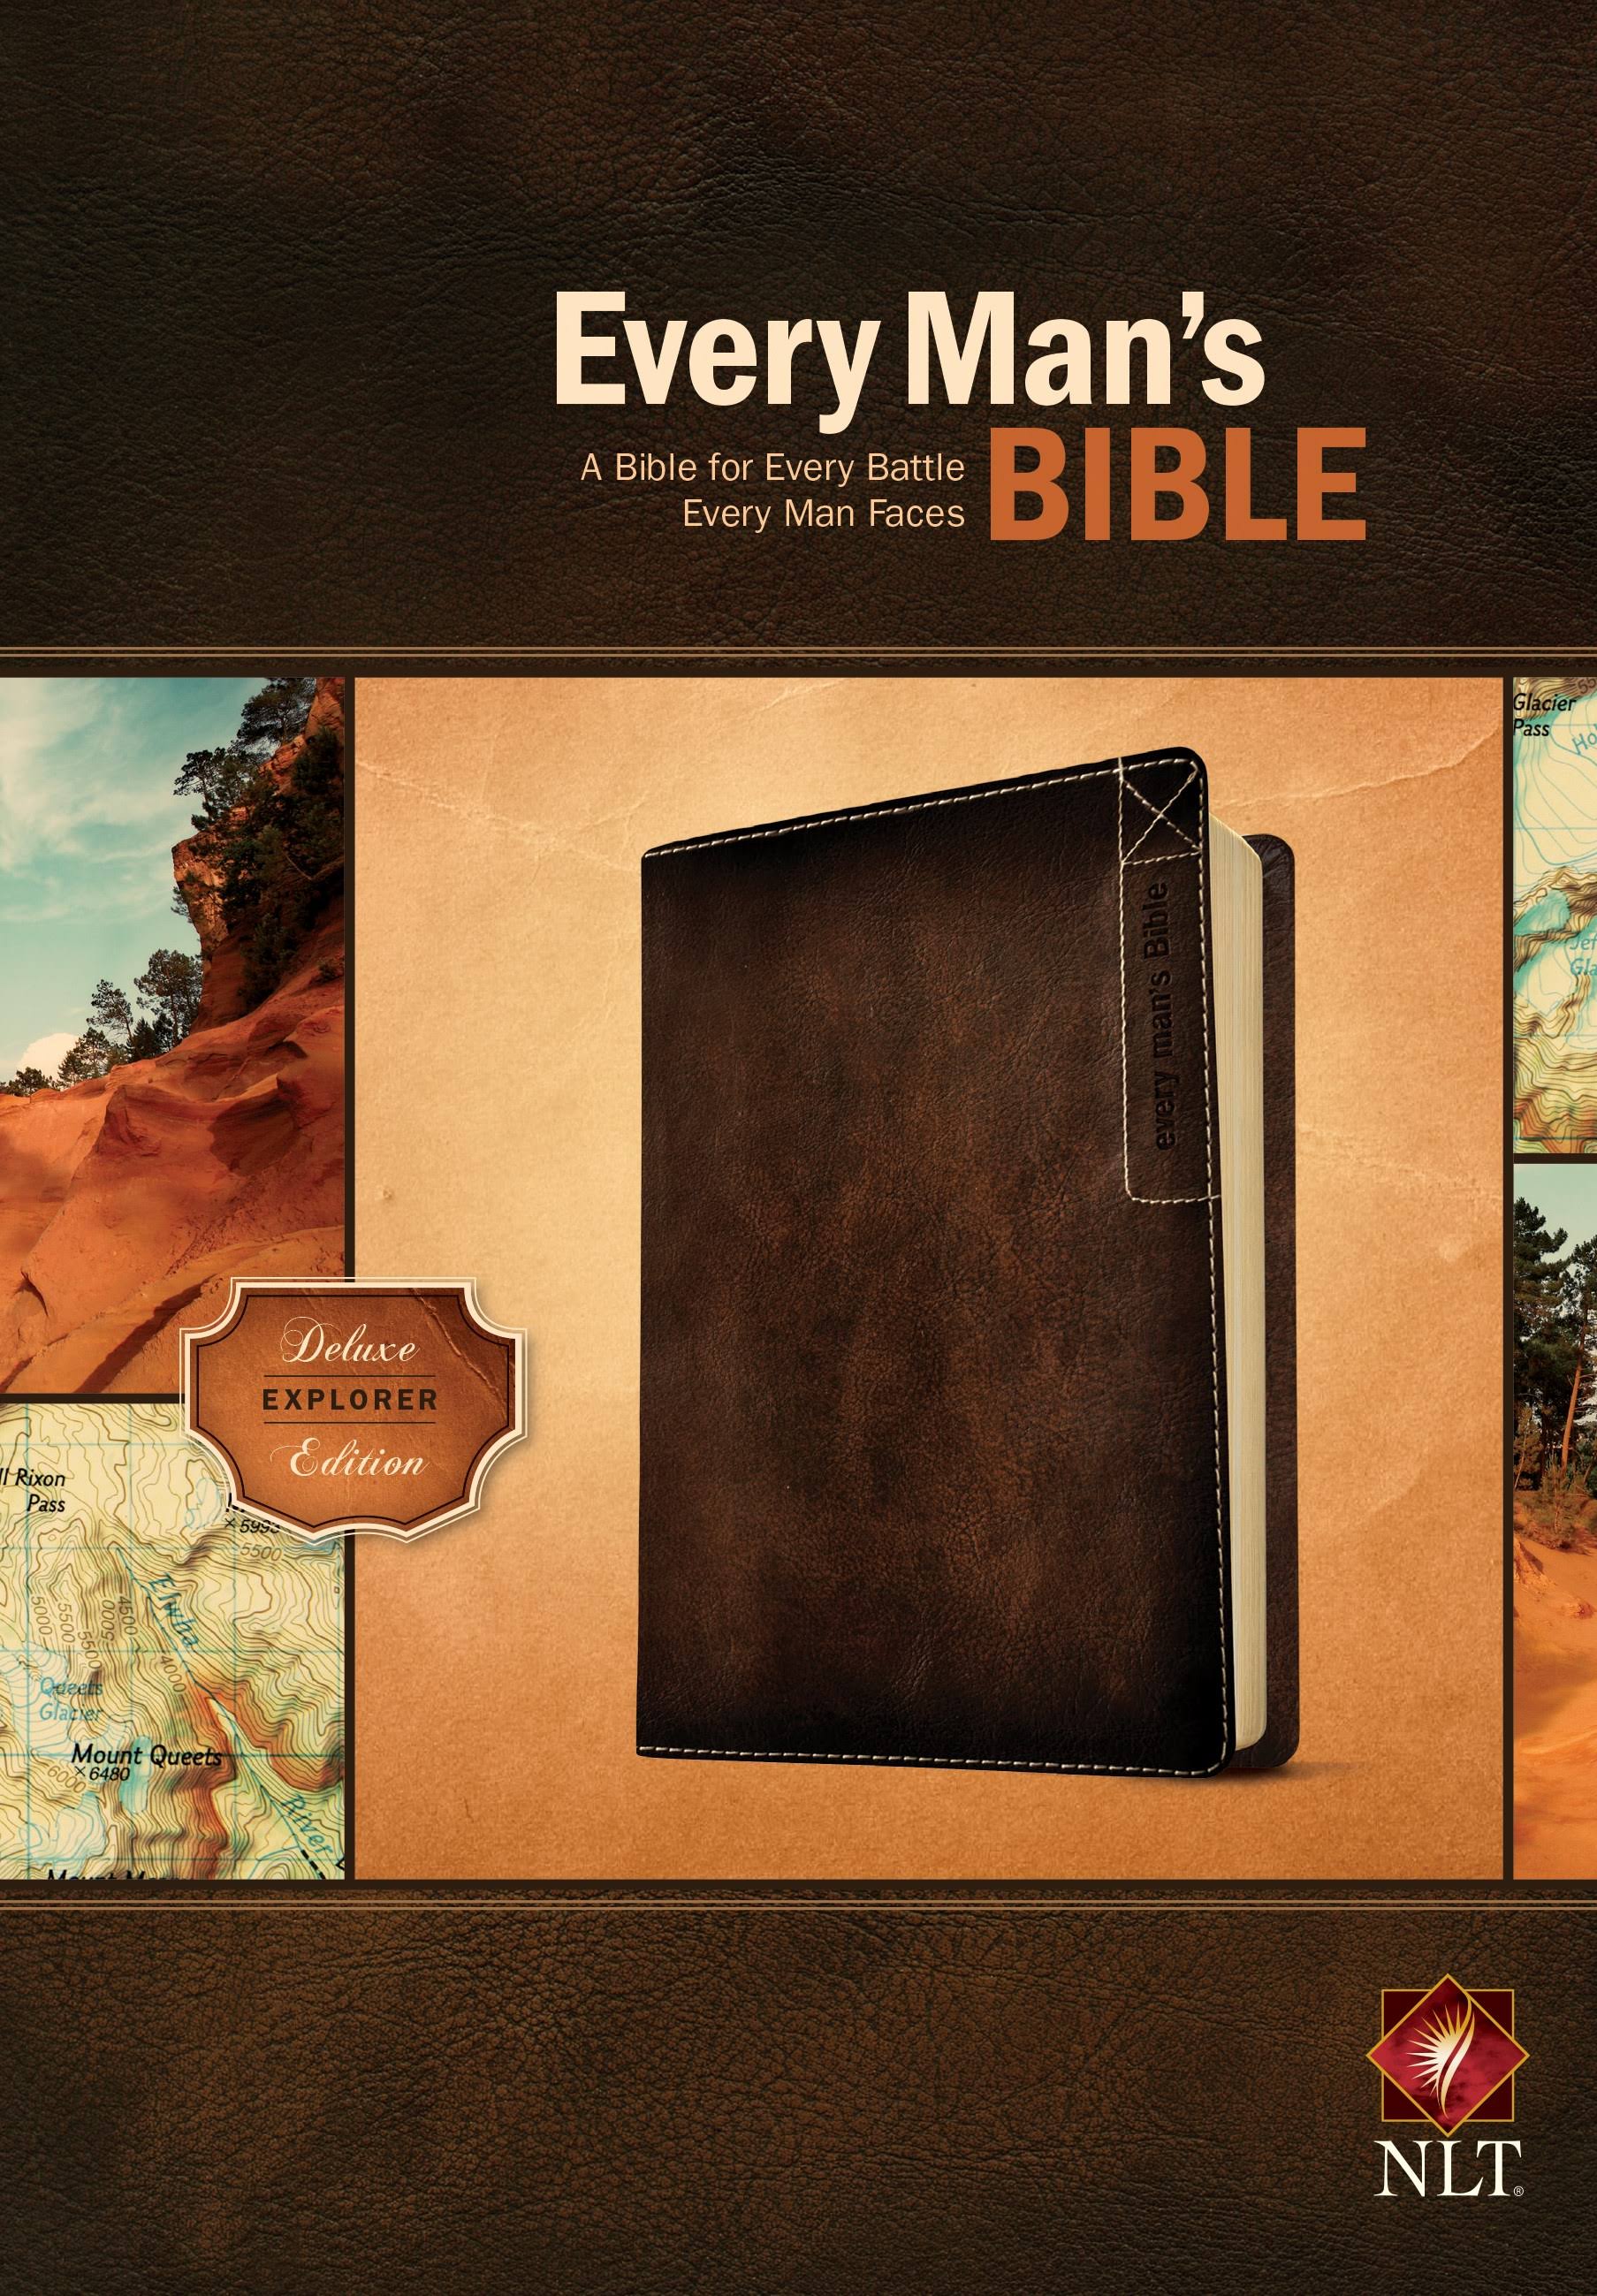 Every Man's Bible NLT - Tyndale House Publishers